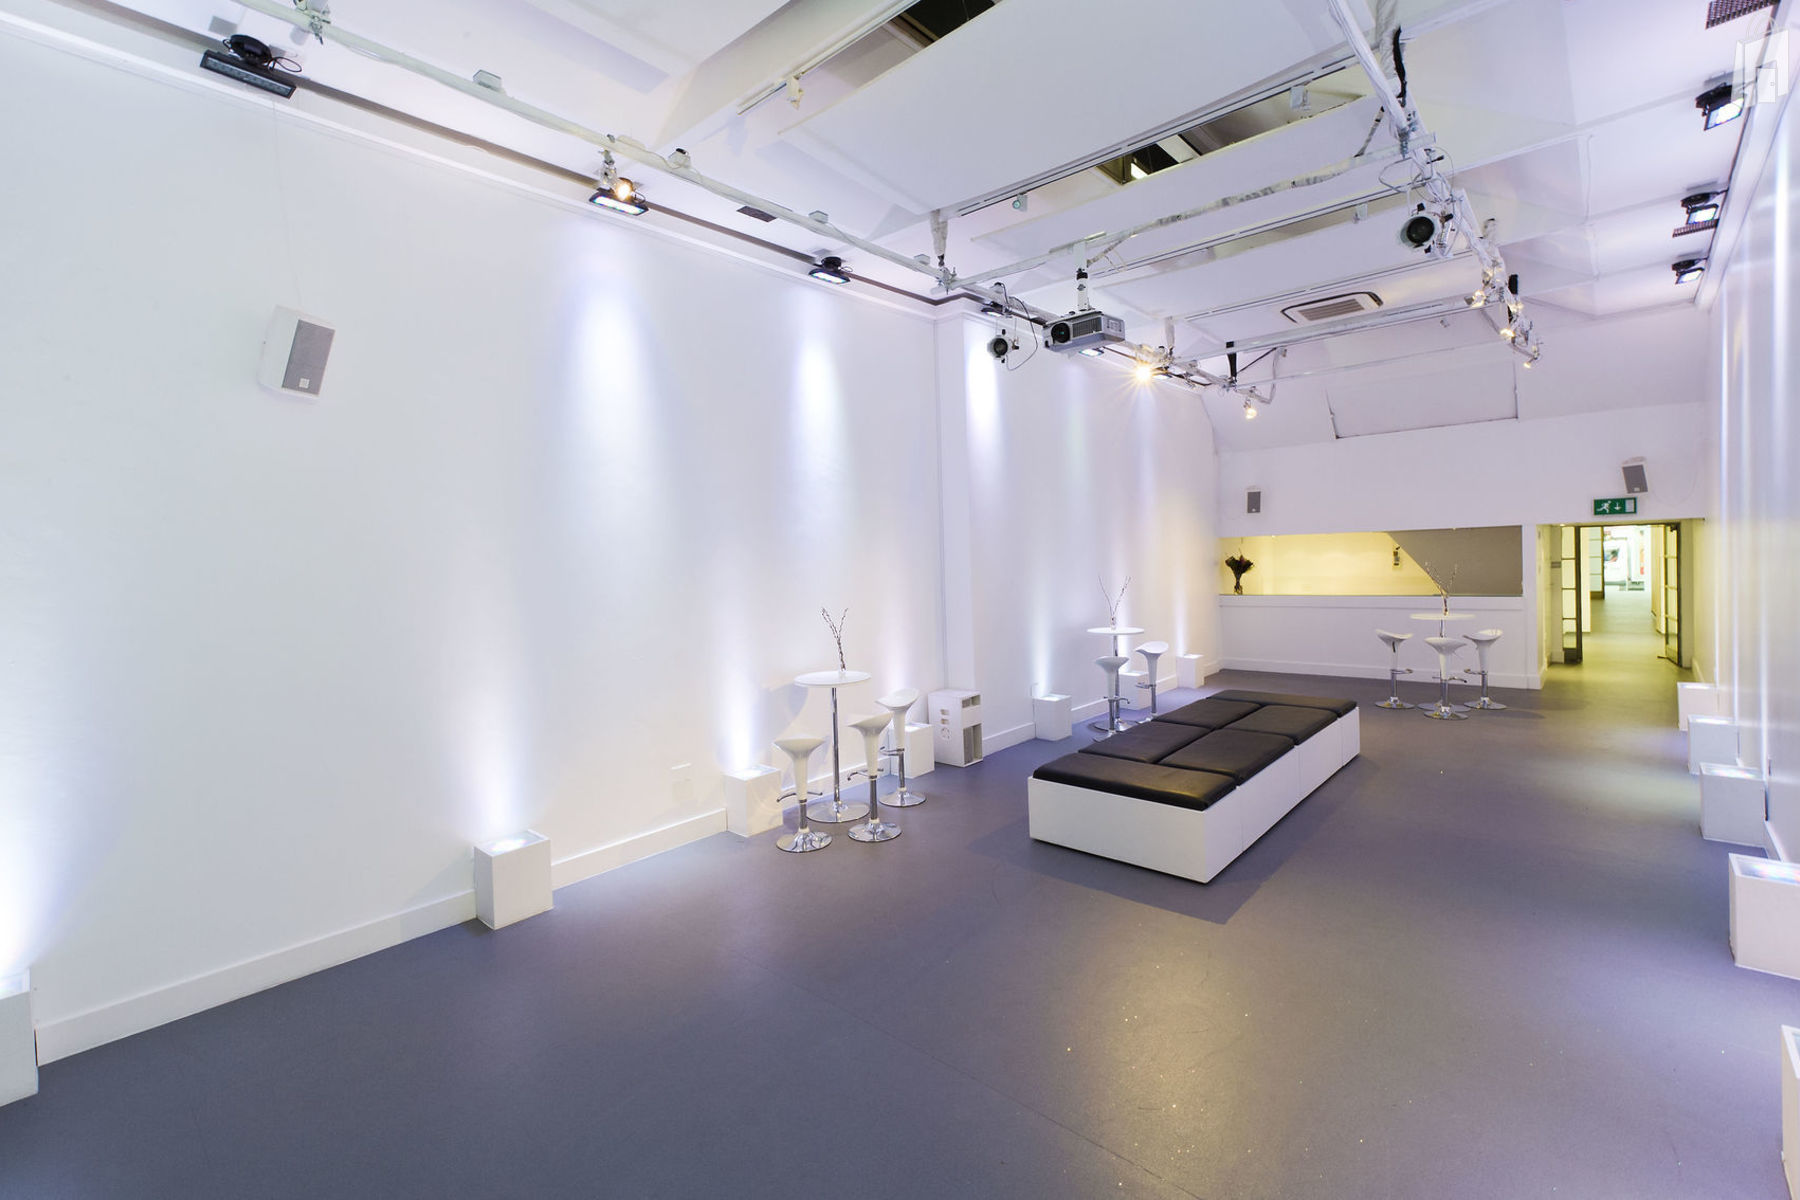 GALLERY & EVENTS VENUE AT LEICESTER SQUARE